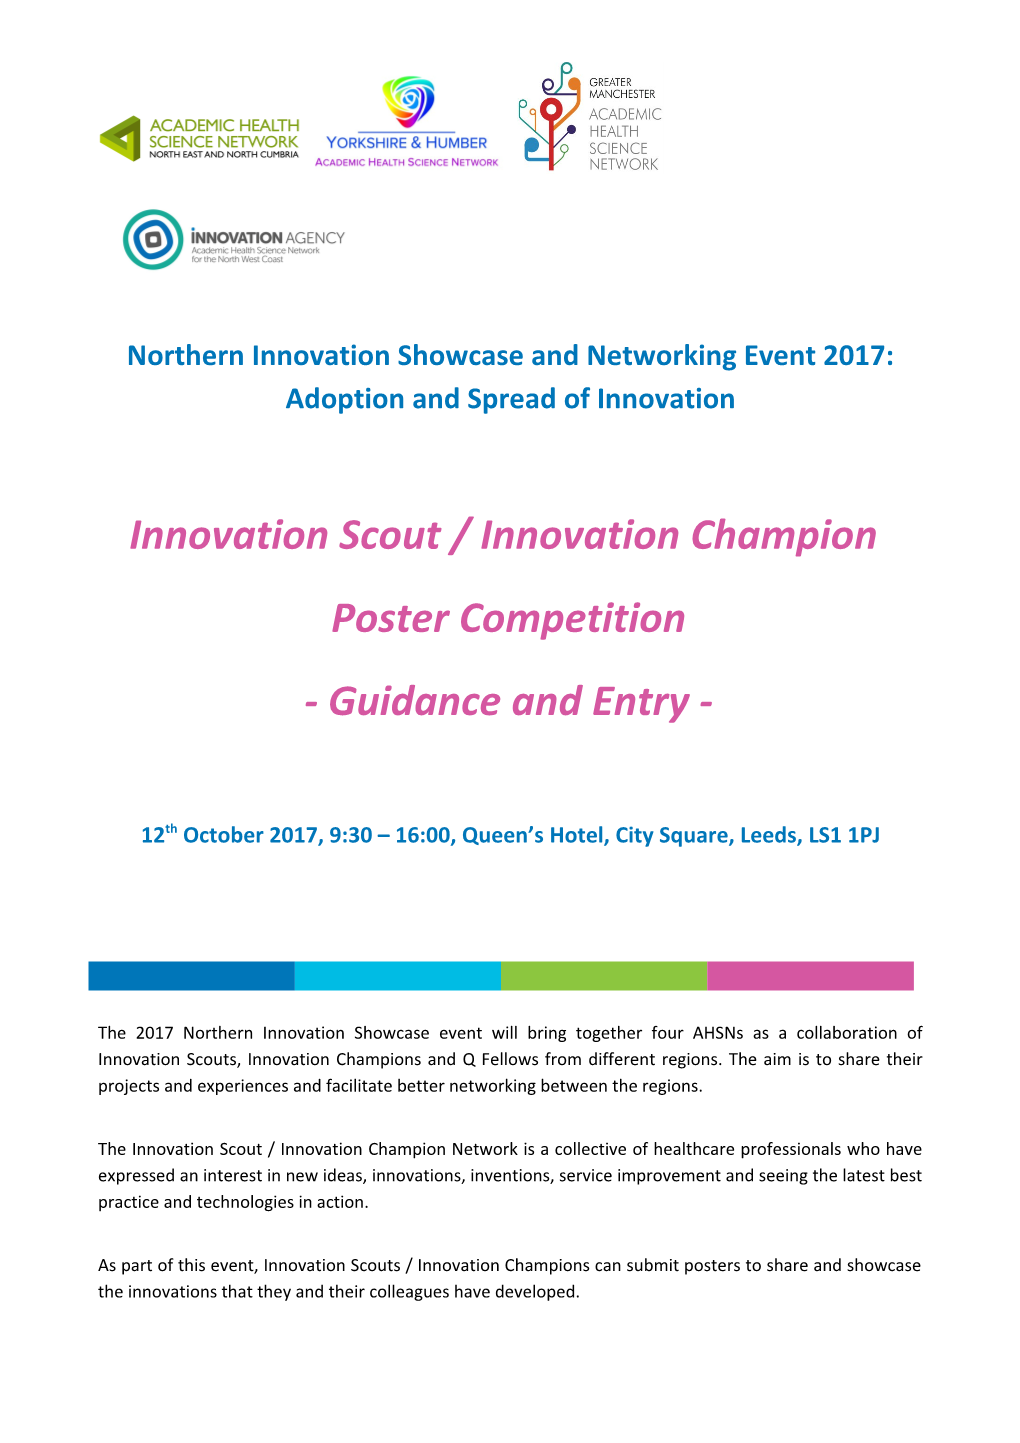 Northern Innovation Showcase and Networking Event 2017: Adoption and Spread of Innovation